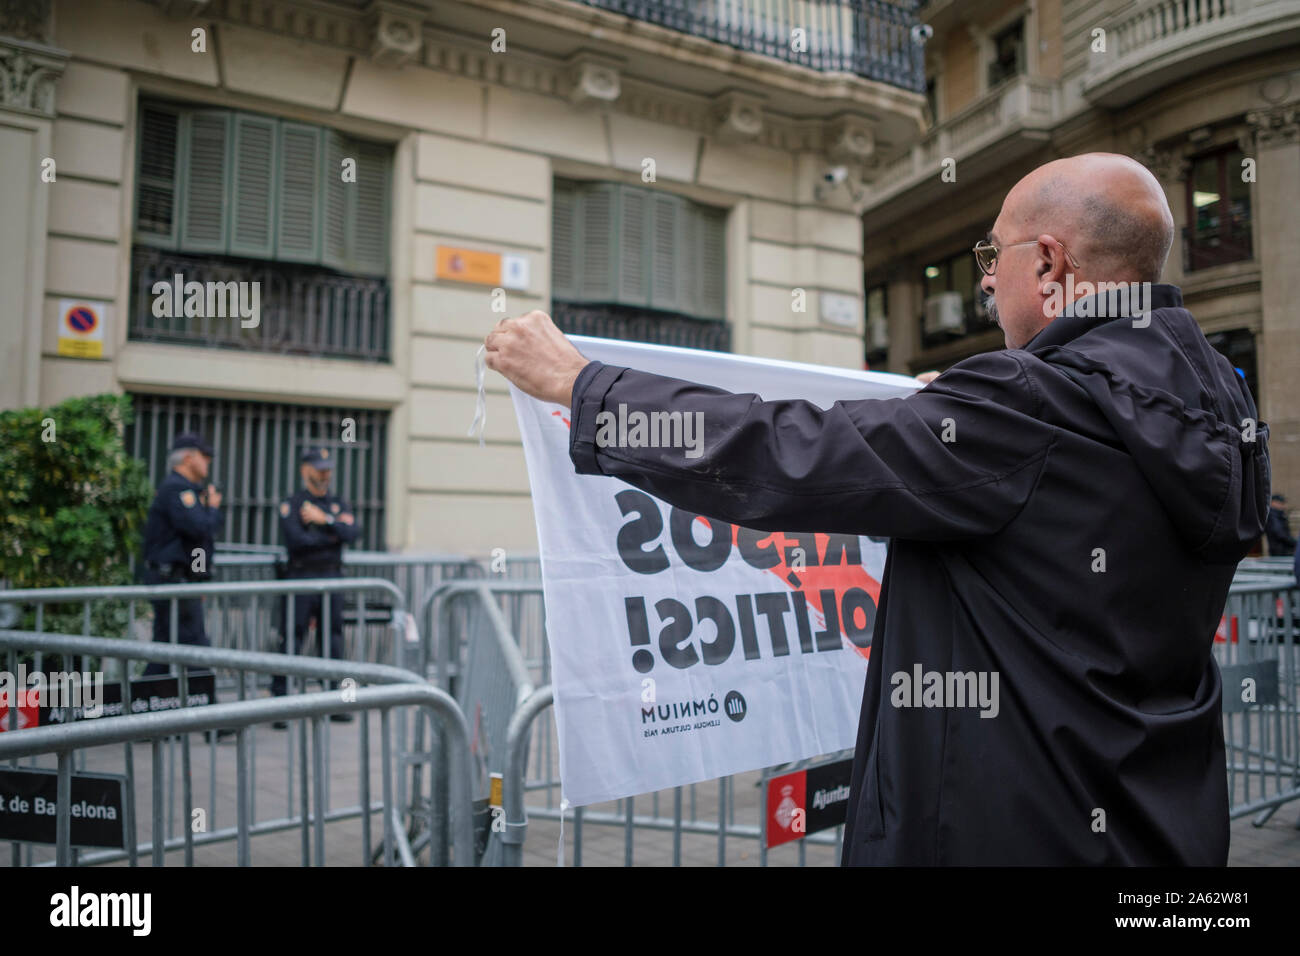 Barcelona, Spain. 23th Oct, 2019. People protest peacefully in front of the Via Laietana police station. Stock Photo